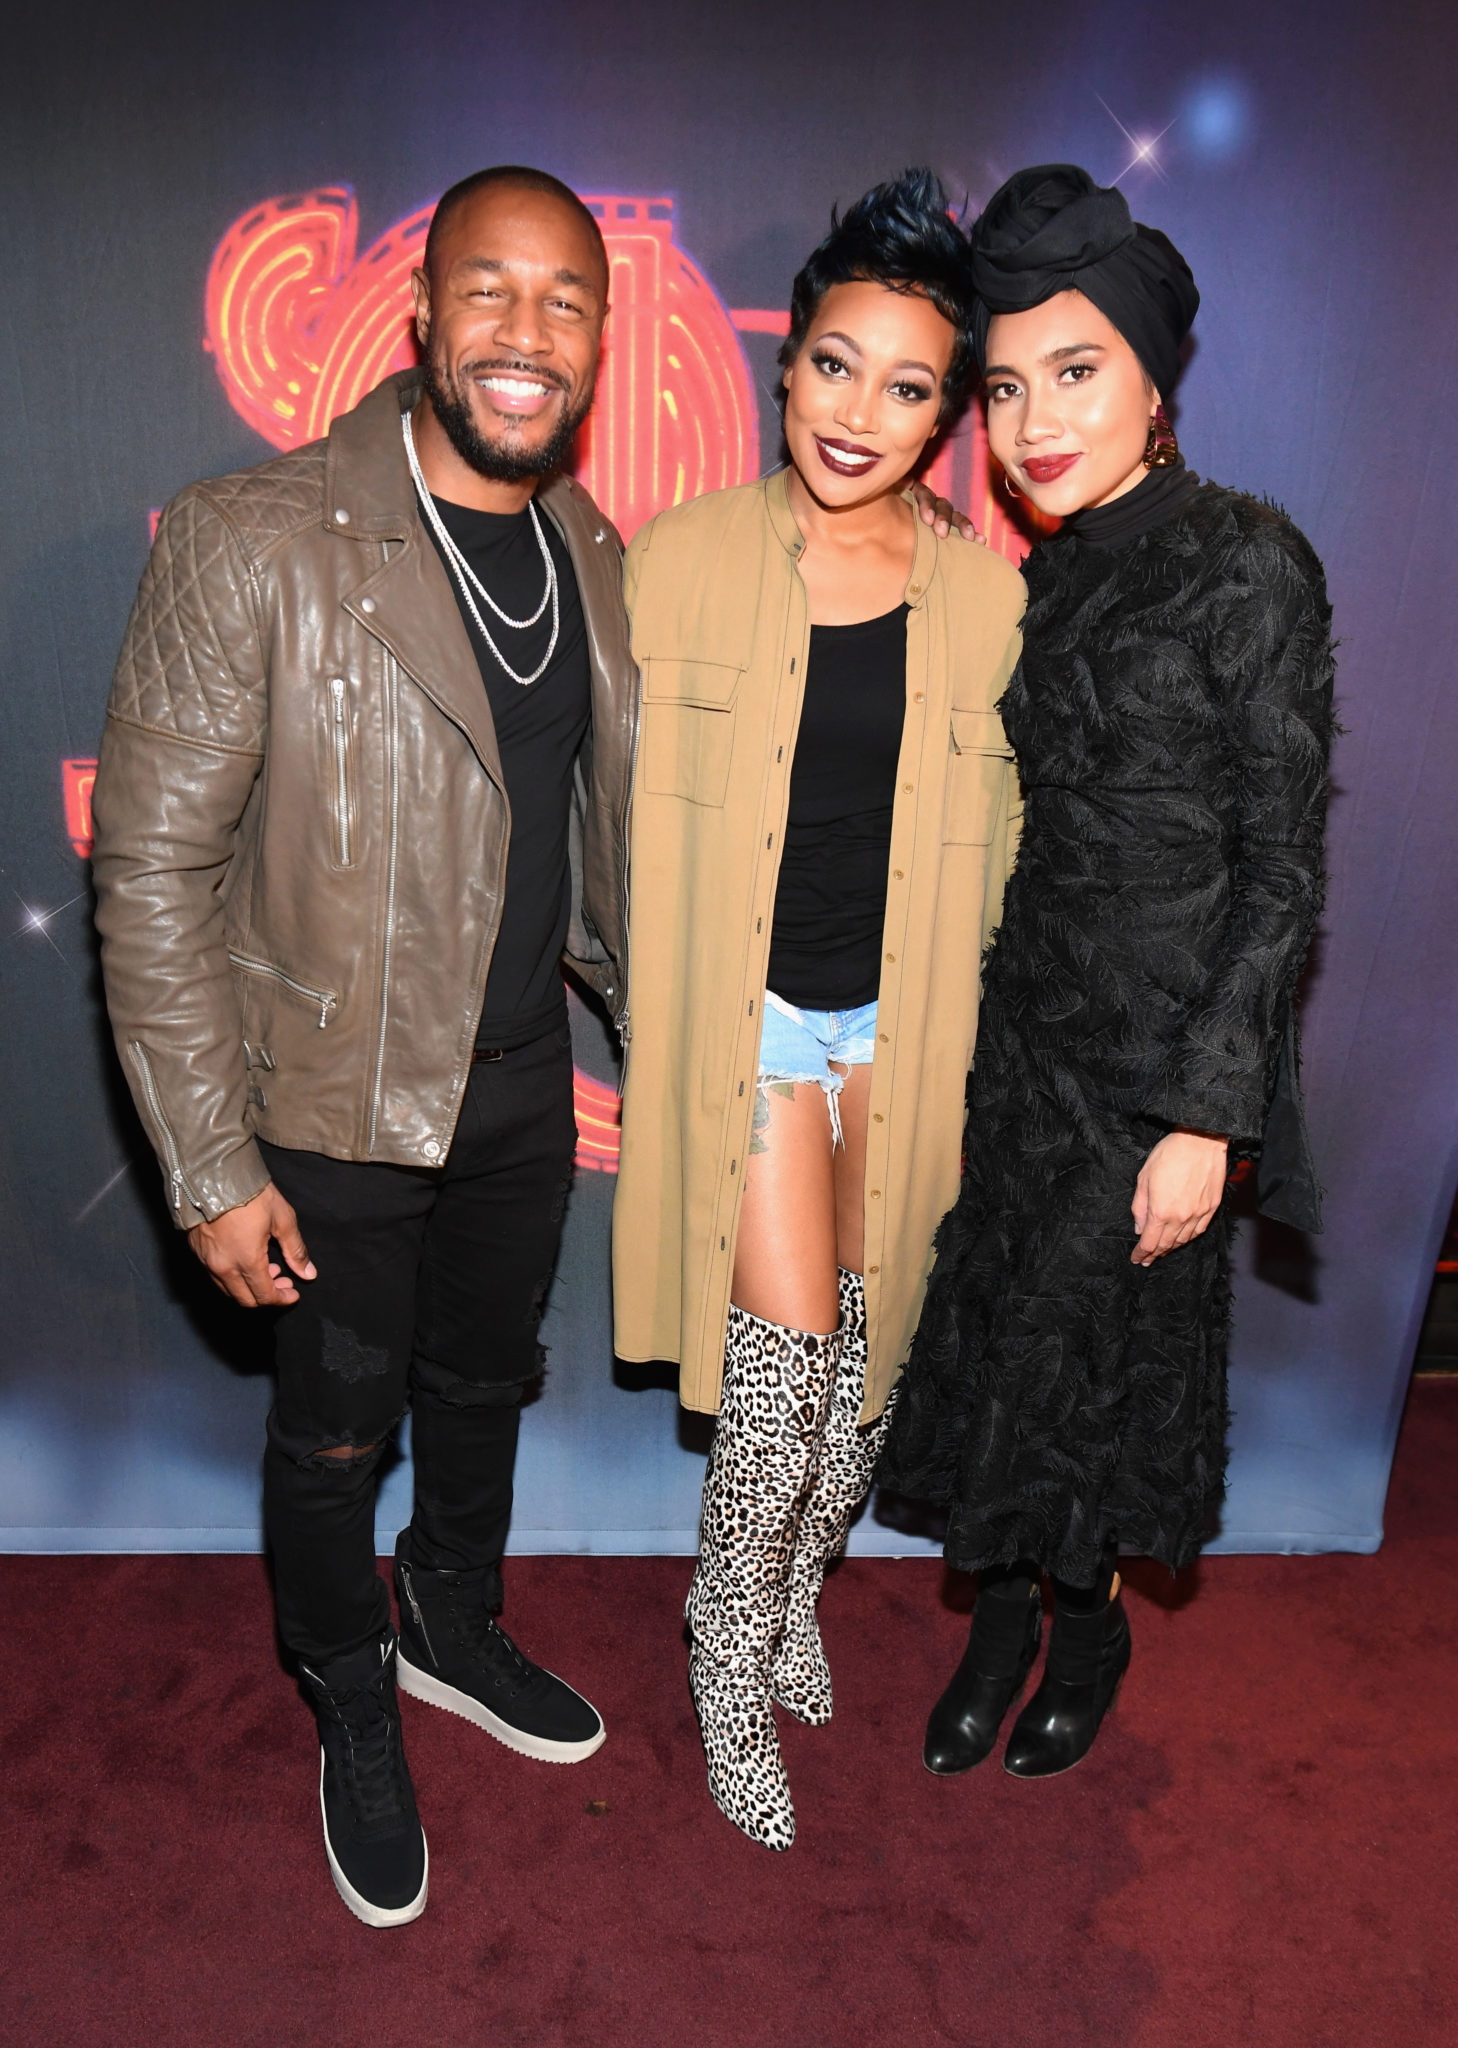 Monica, Tank and Yuna Perform at Soul Train Weekend “Acoustically Speaking” Concert